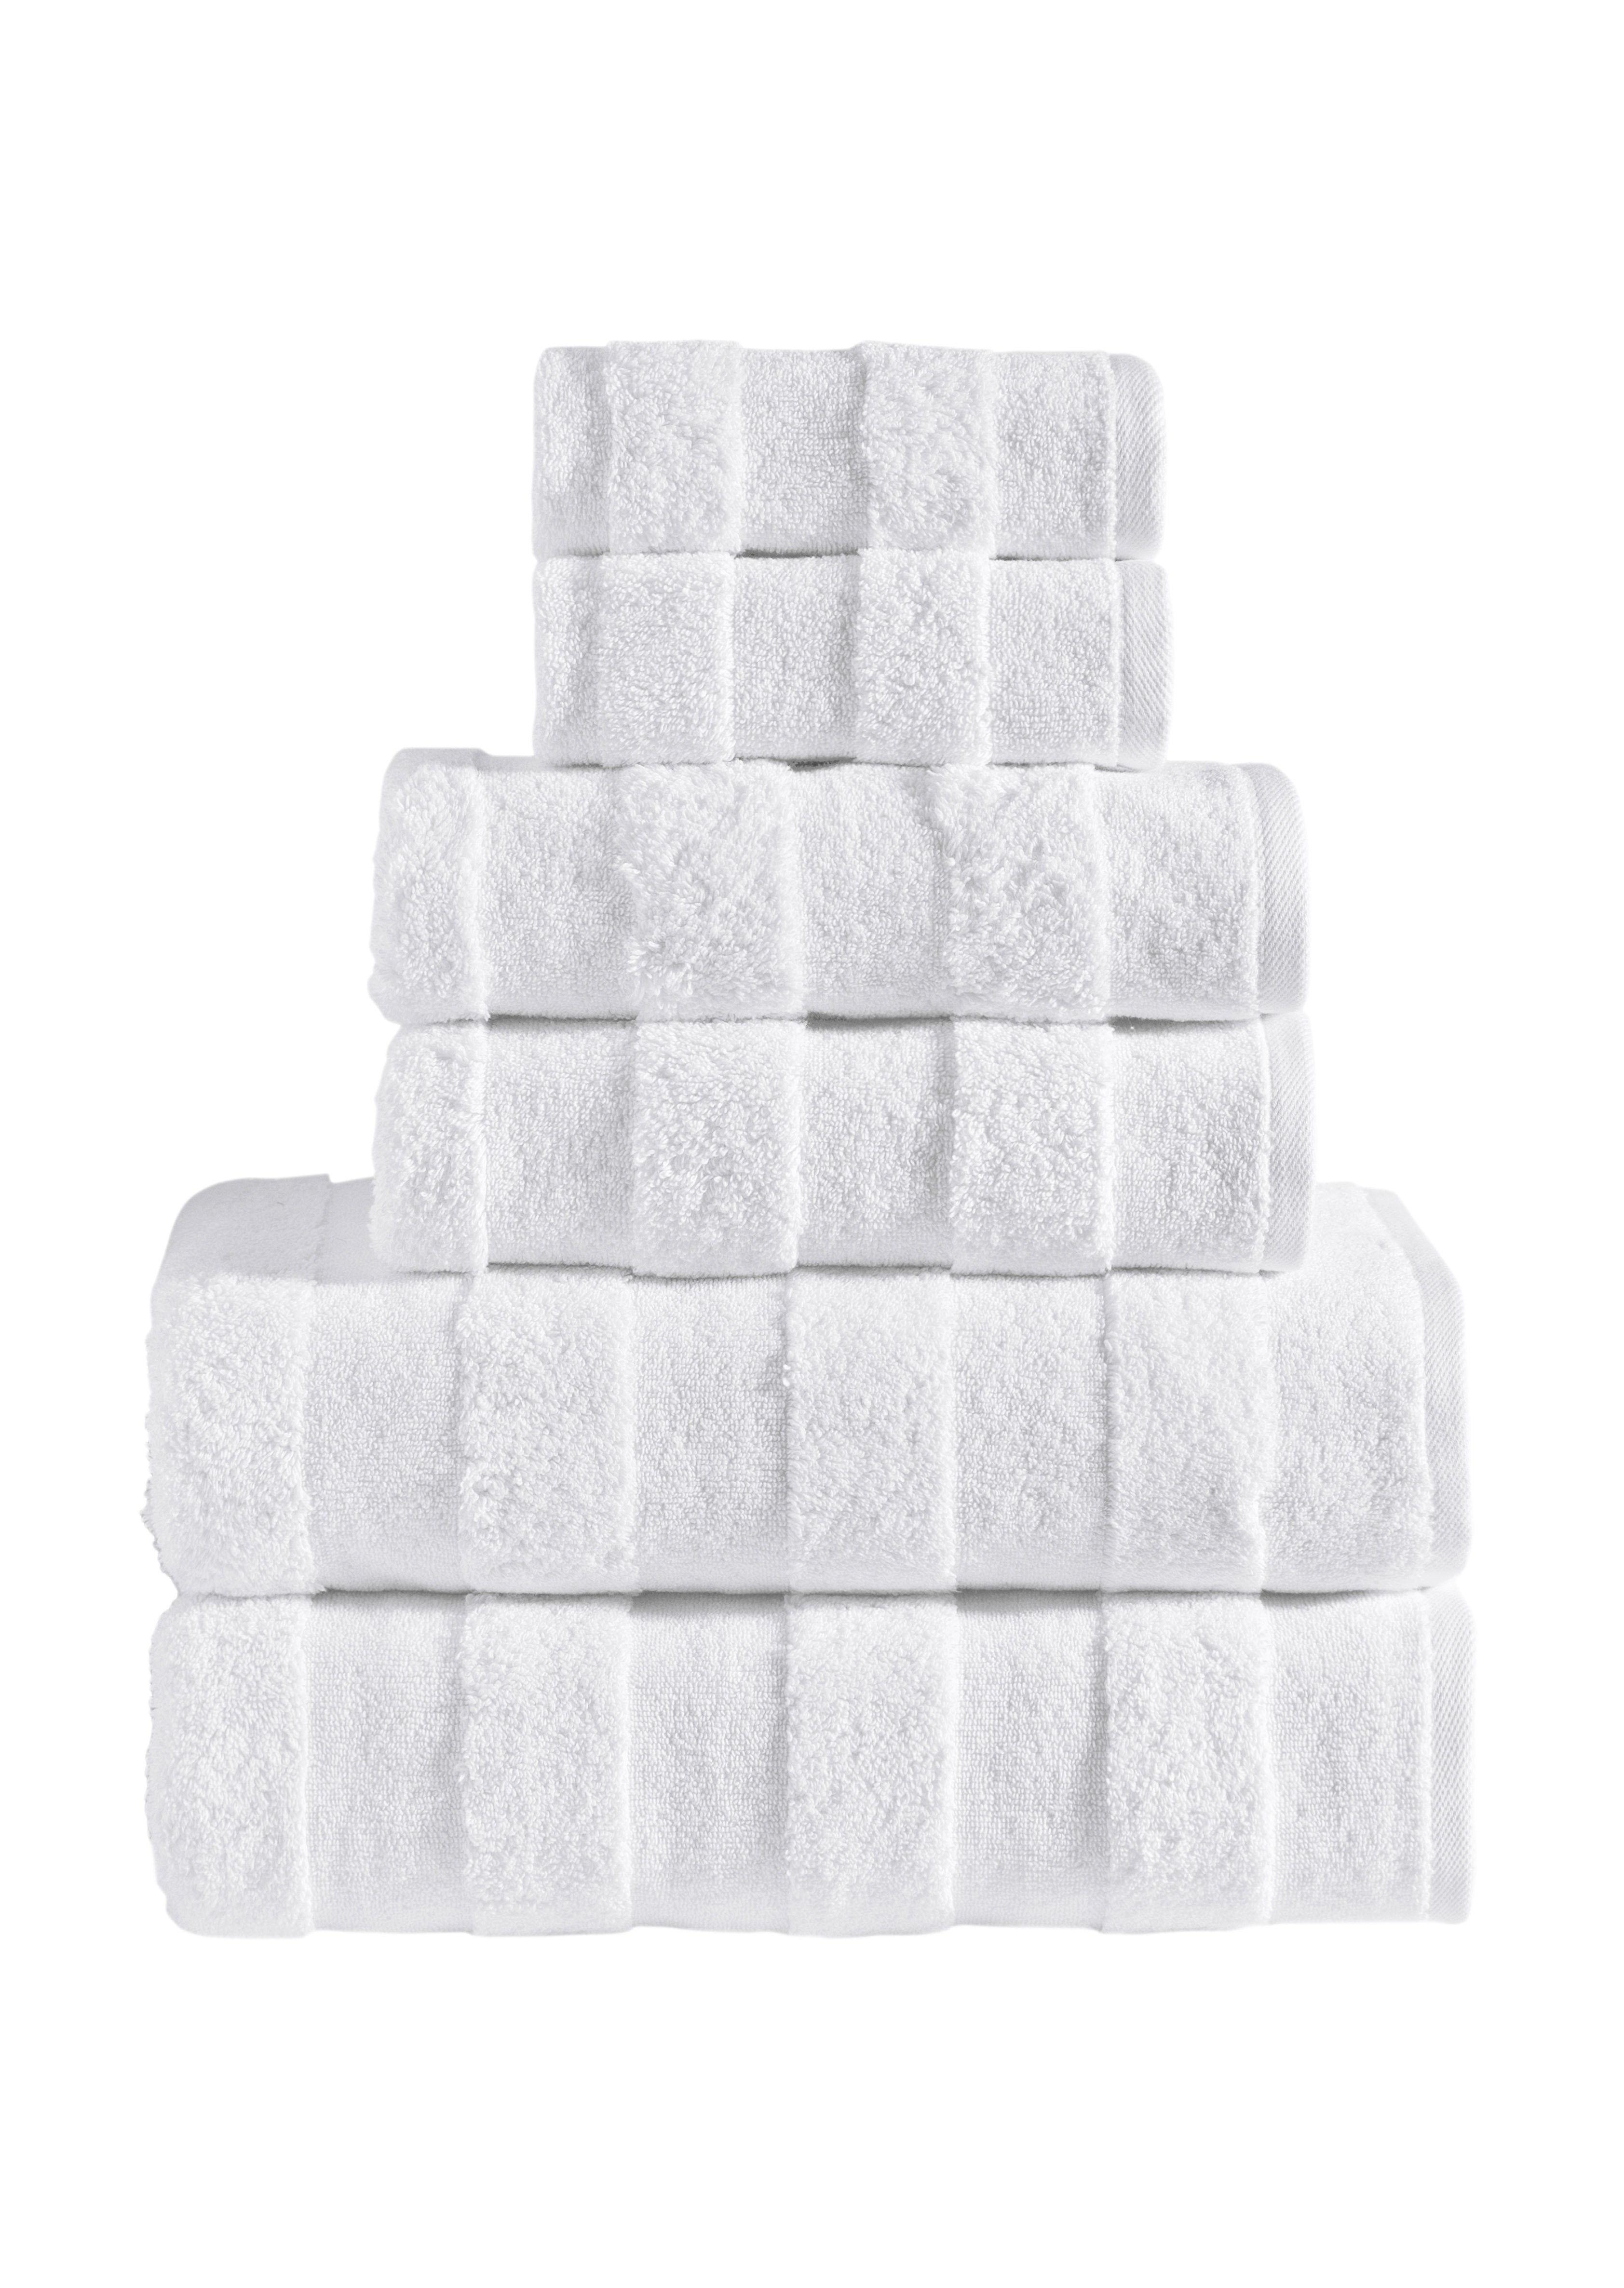 Apogee Collection 6 PK Towels Set - White  